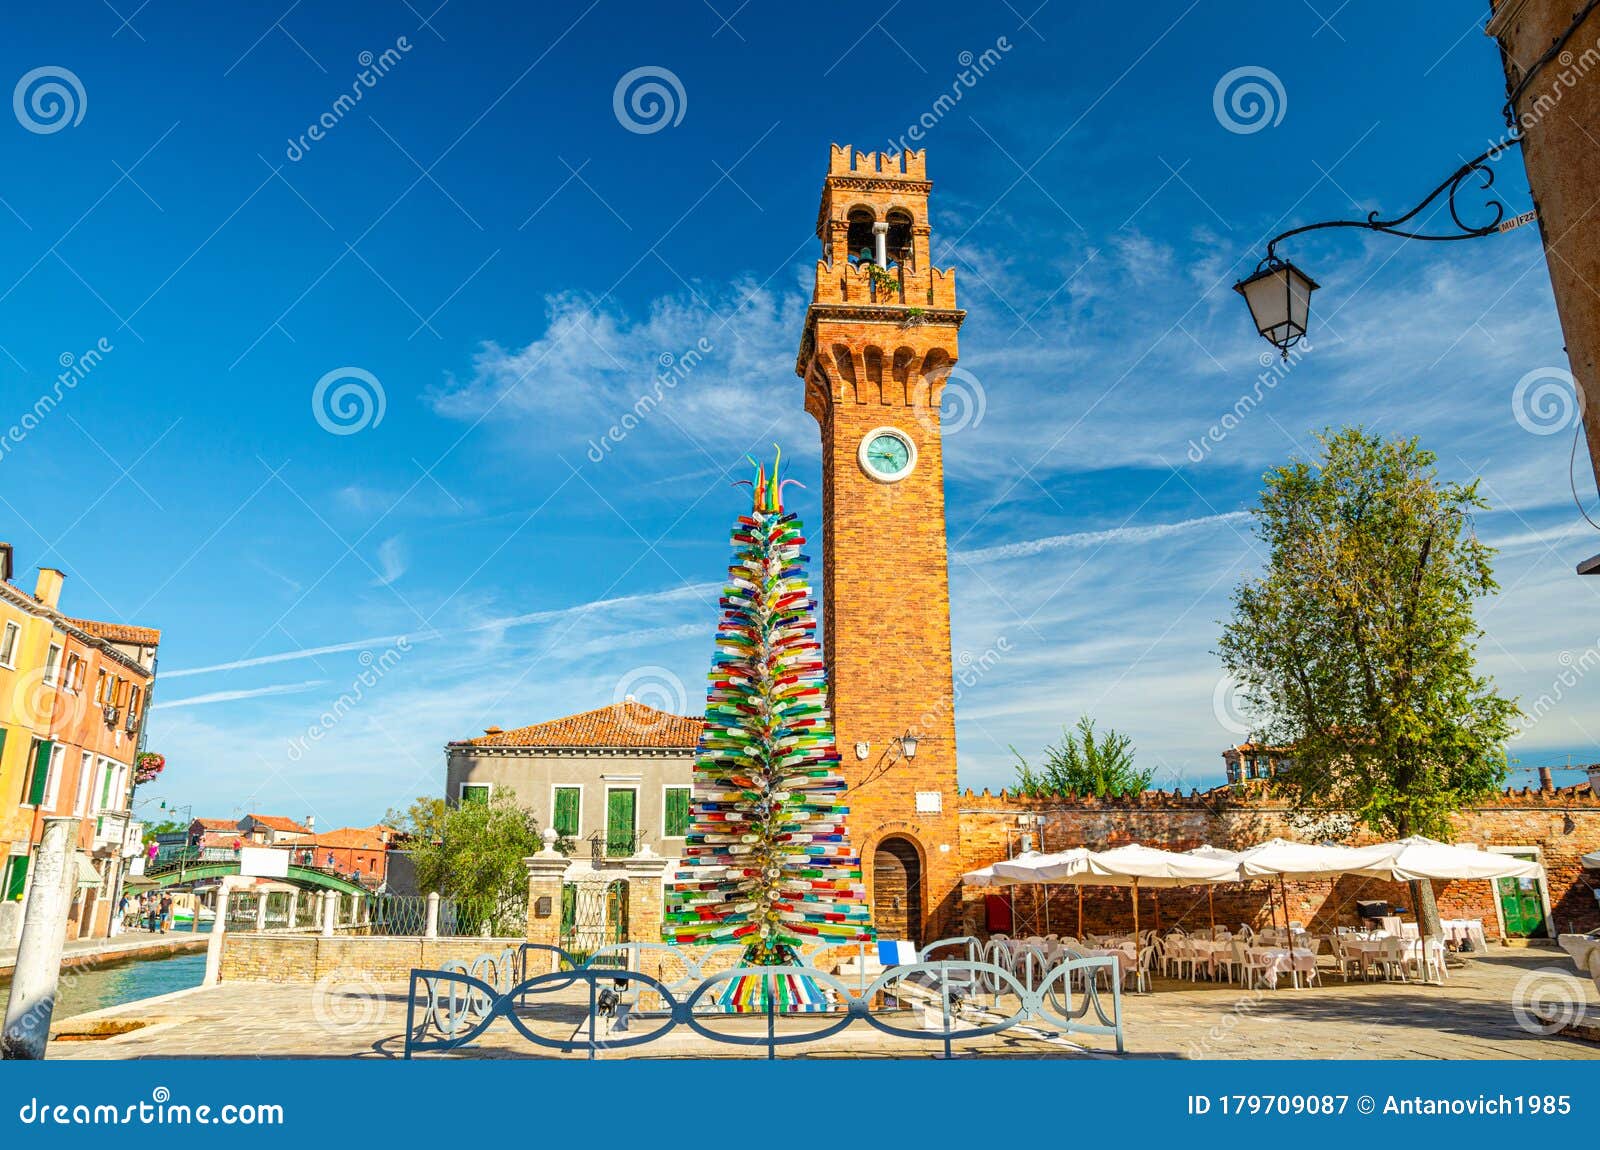 murano clock tower torre dell`orologio of san stefano church, colorful christmas tree made of murano glass